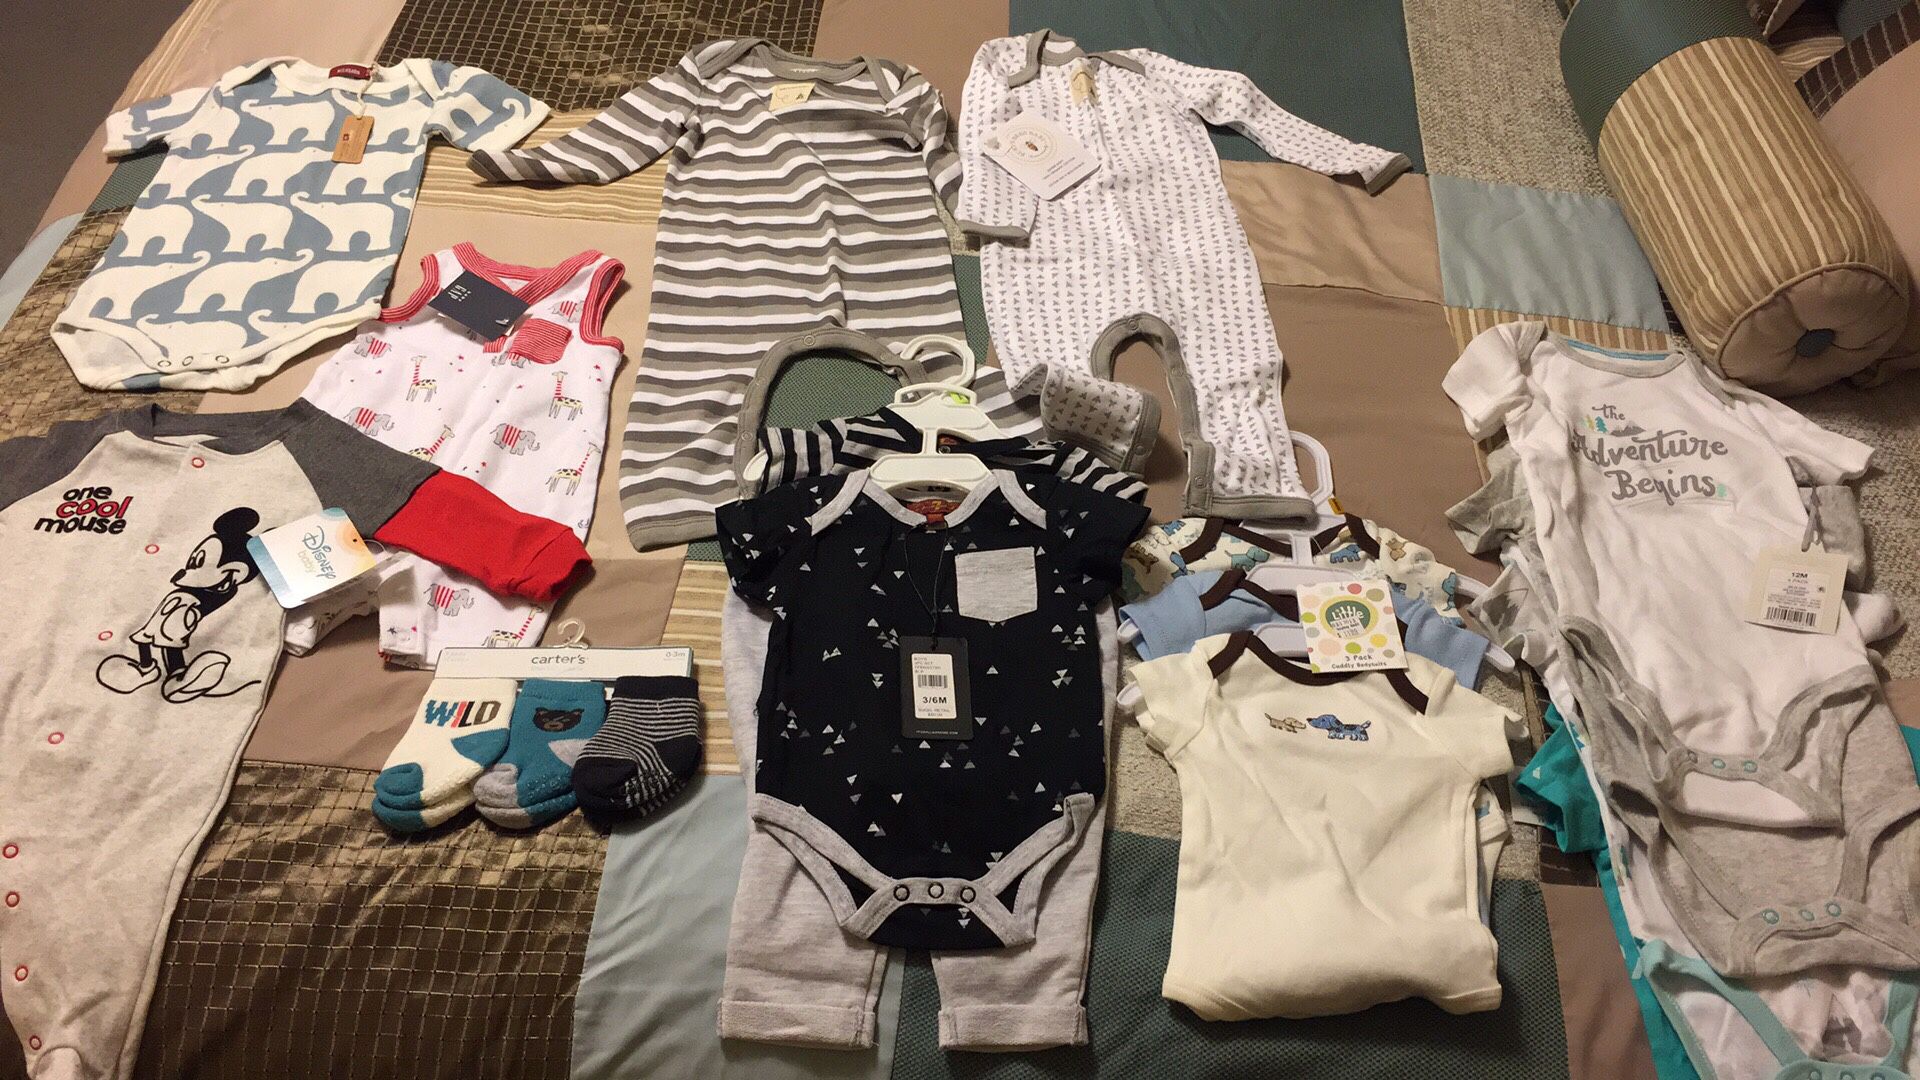 0-12 month baby clothes. Tags on all